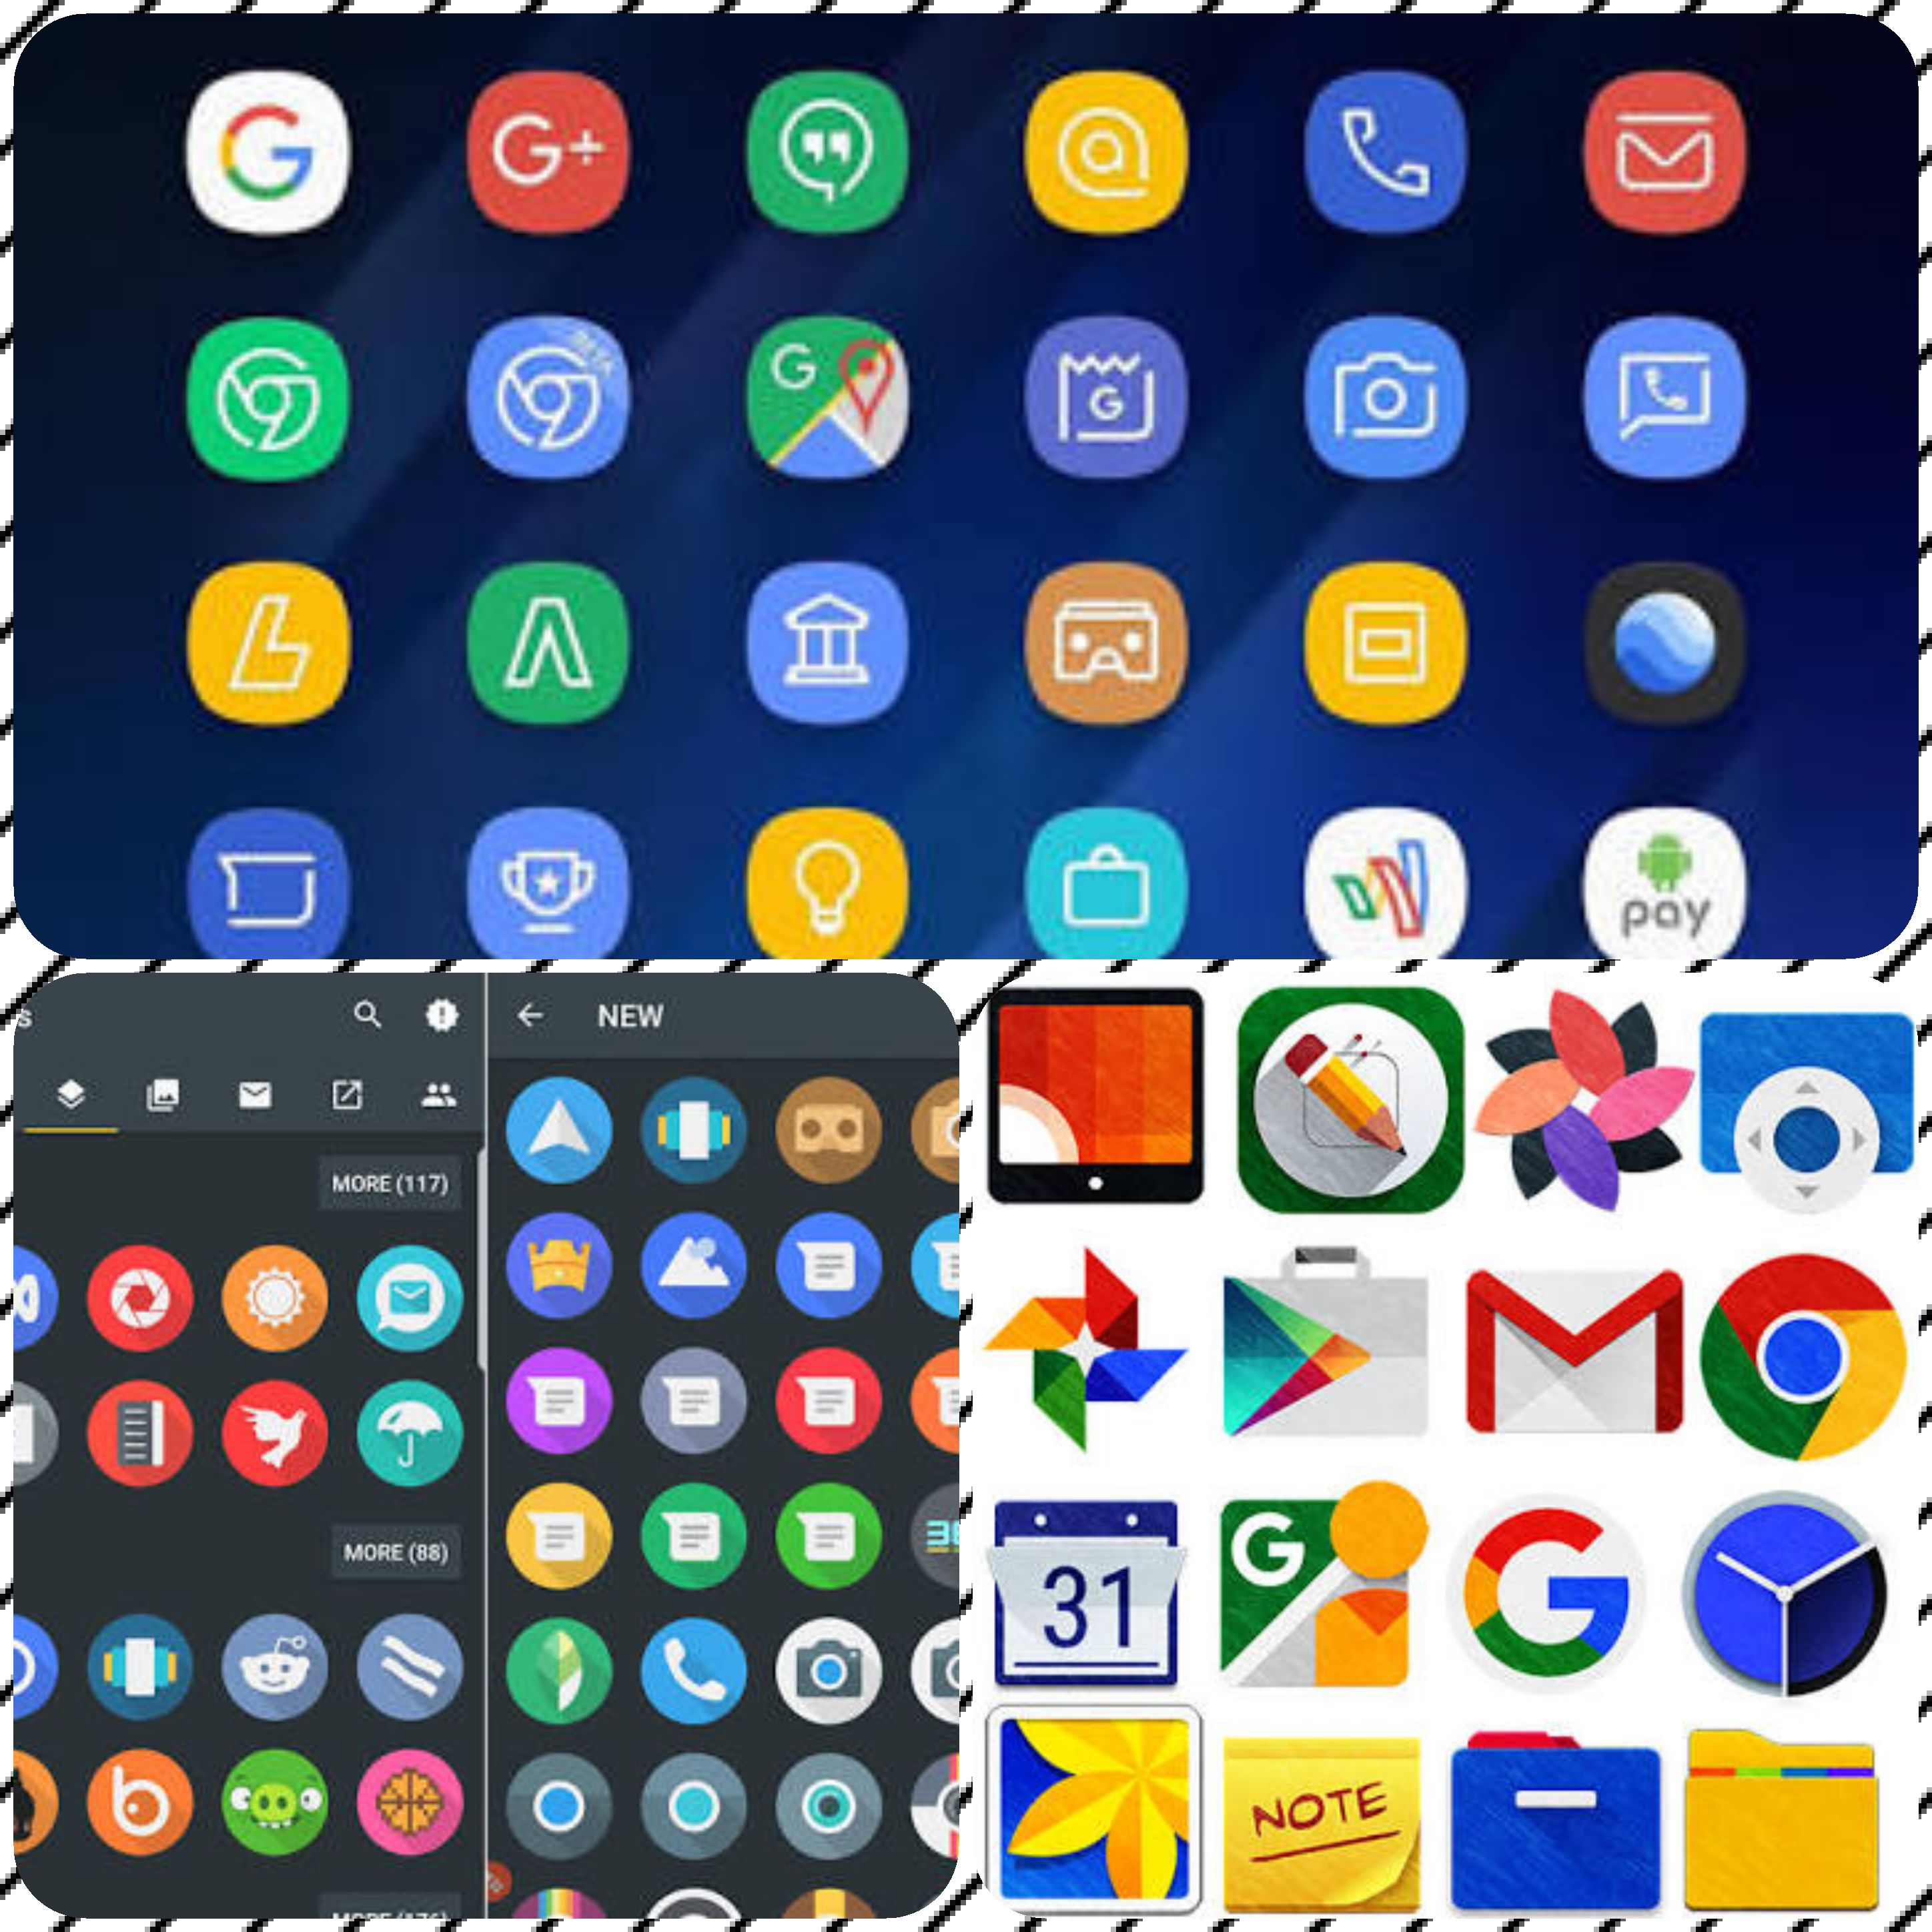 Limited Time: Get these premium Android icon packs for free on Google